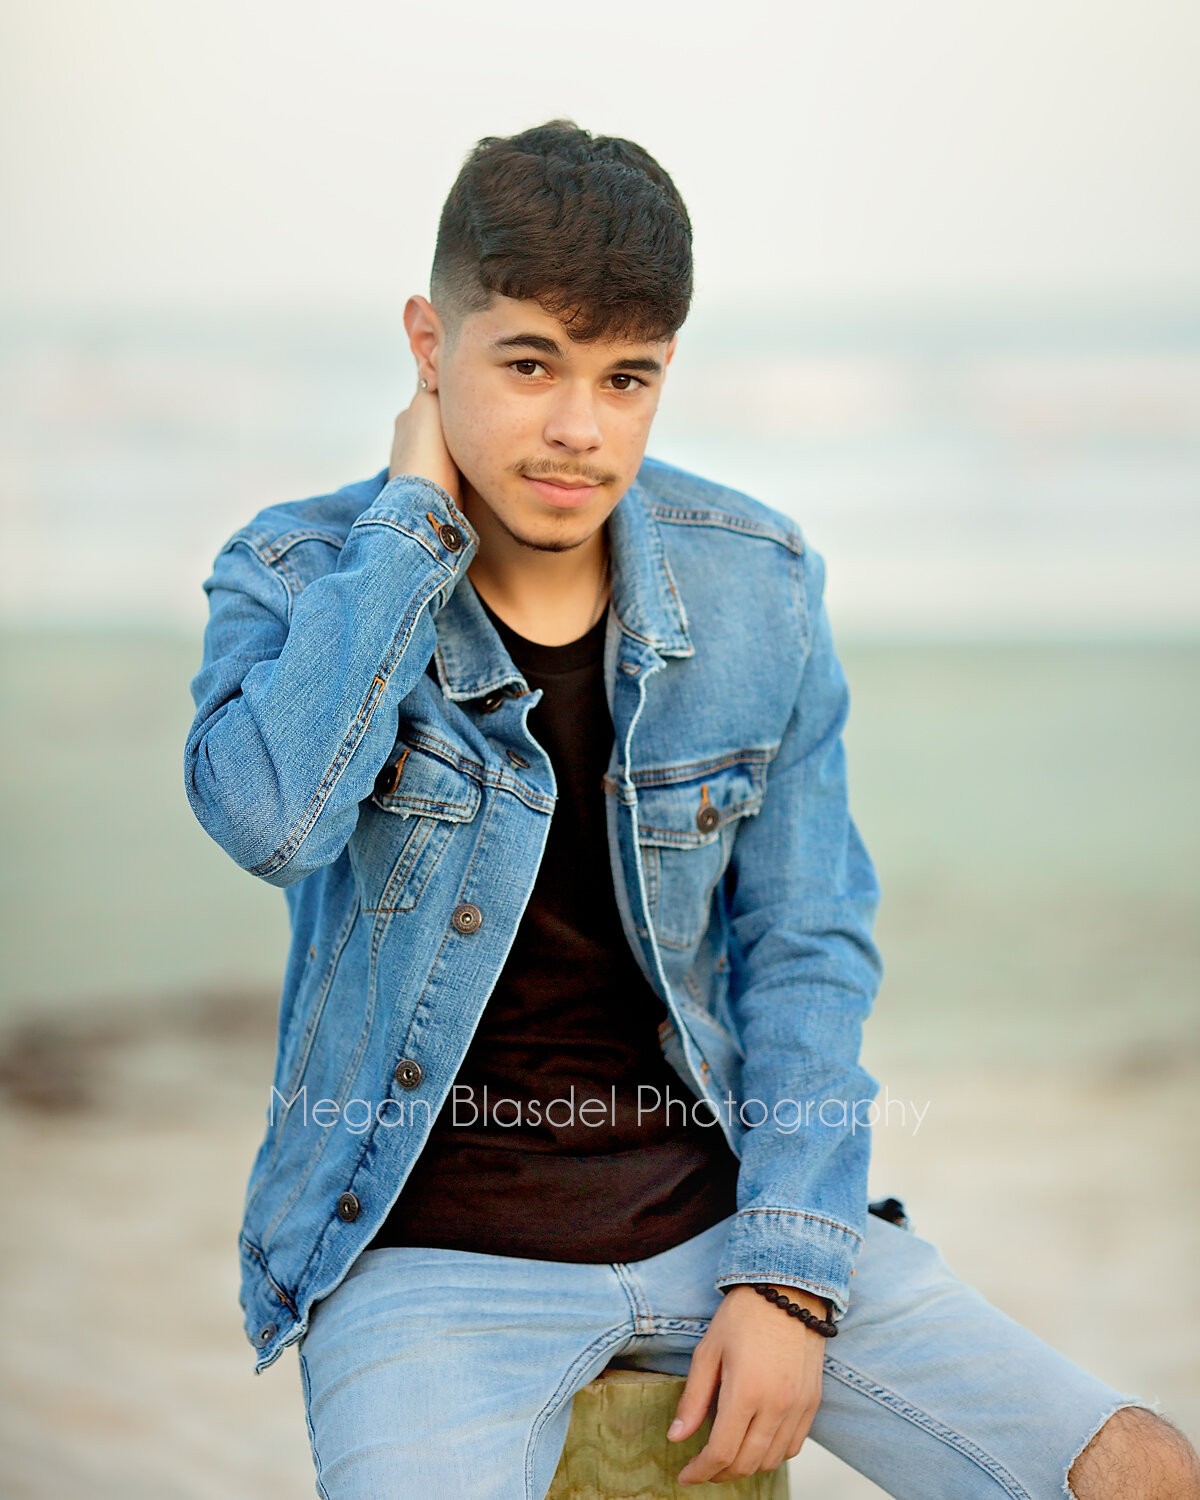 Can I say he's got that drip....or is that not allowed? 😆 Seniors, have you booked your session yet? Graduation isn't very far away! 

#seniorsunday #millenialphotographer #galvestontx